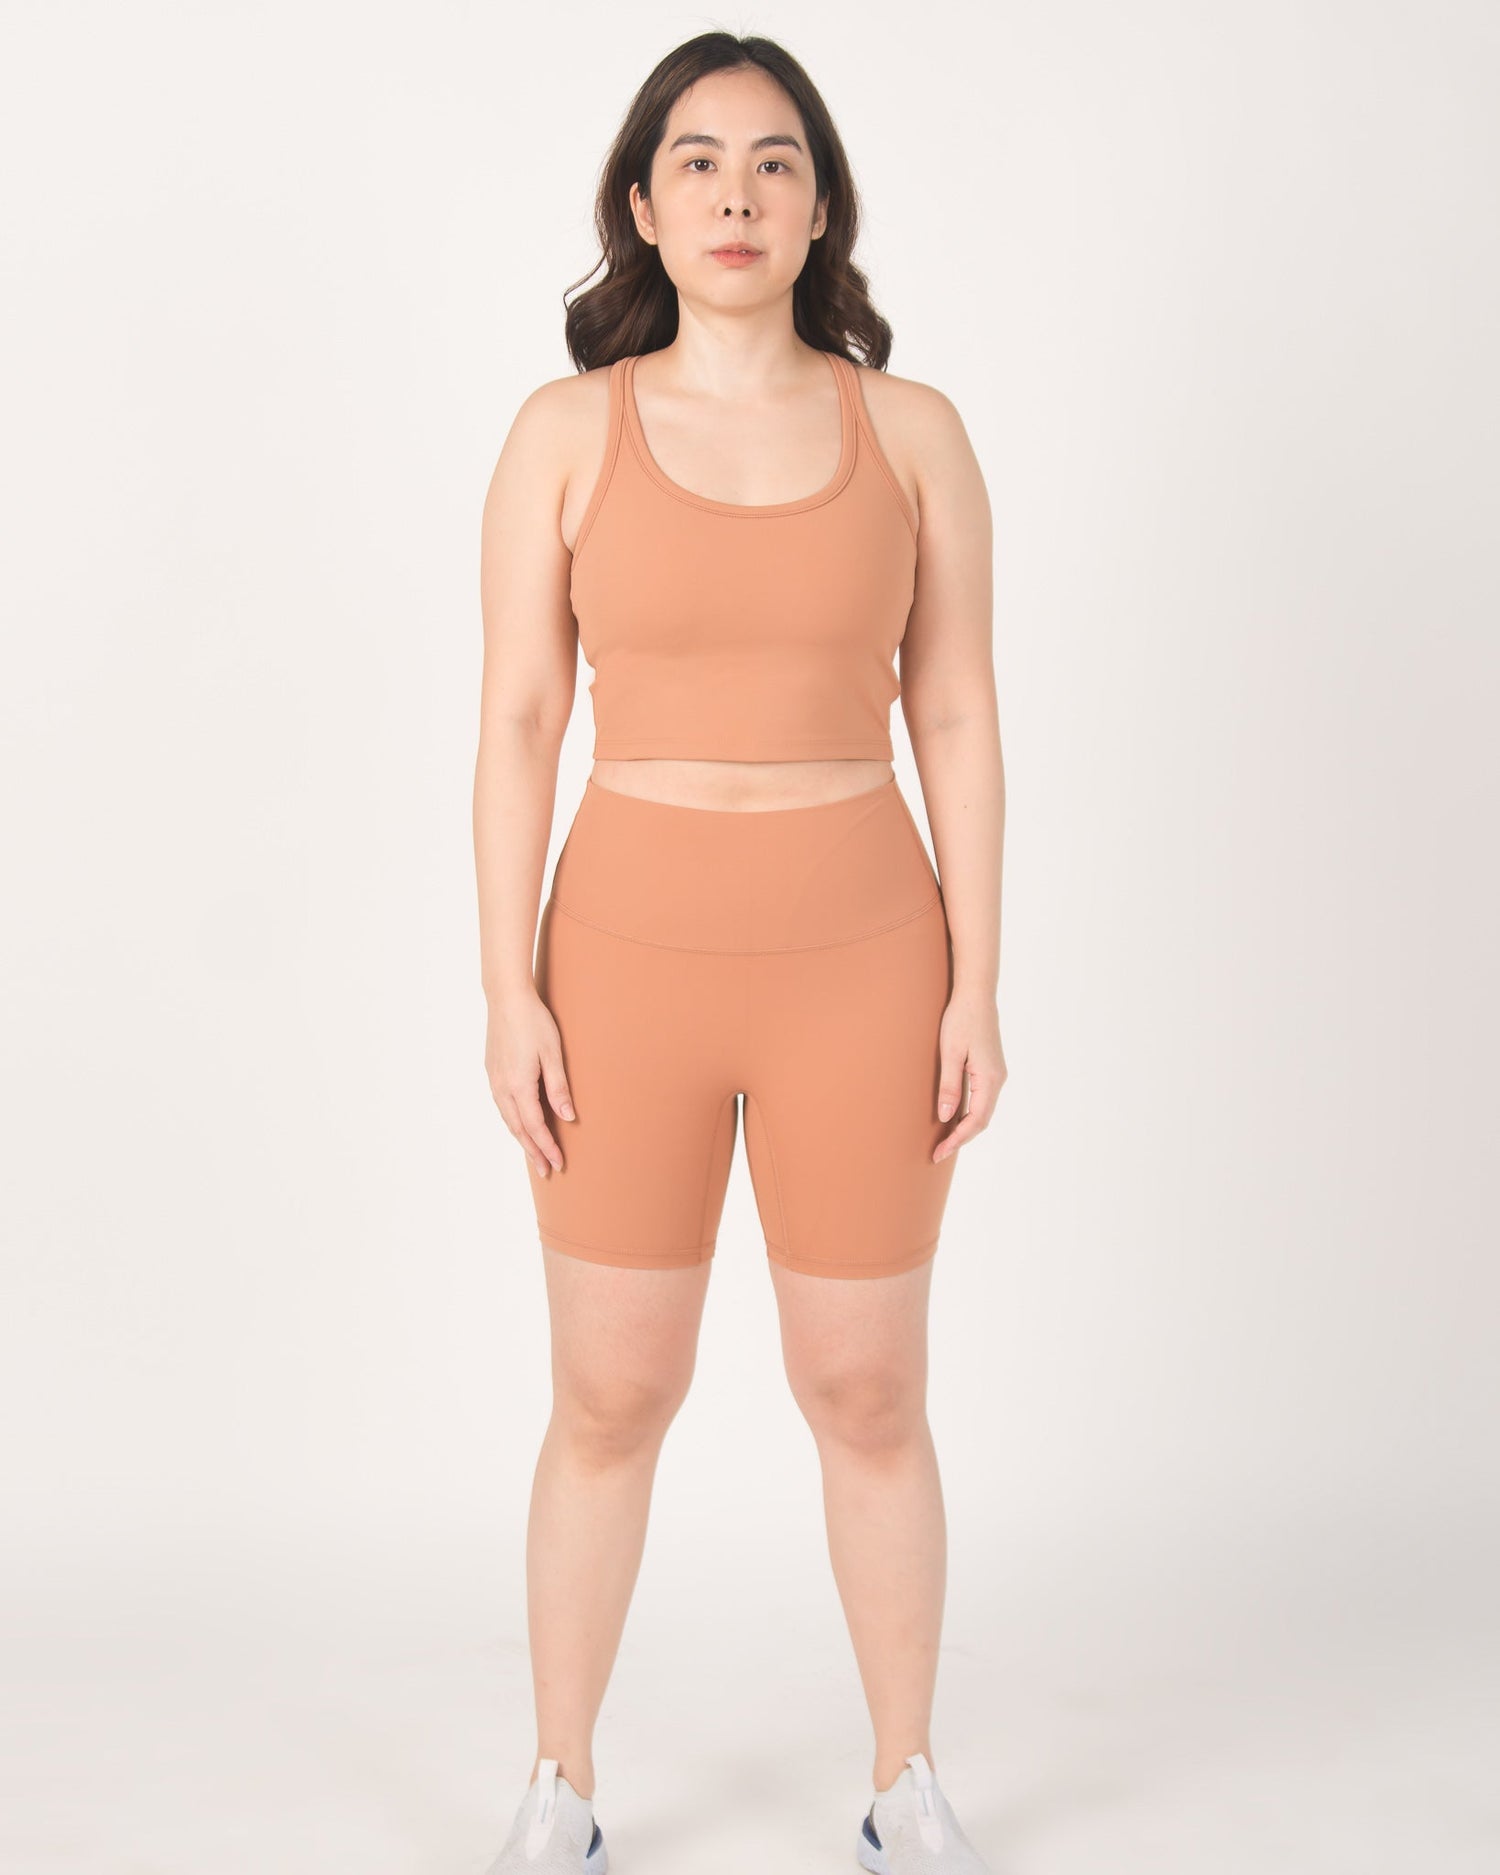 Train shorts in Spice - New Day Activewear